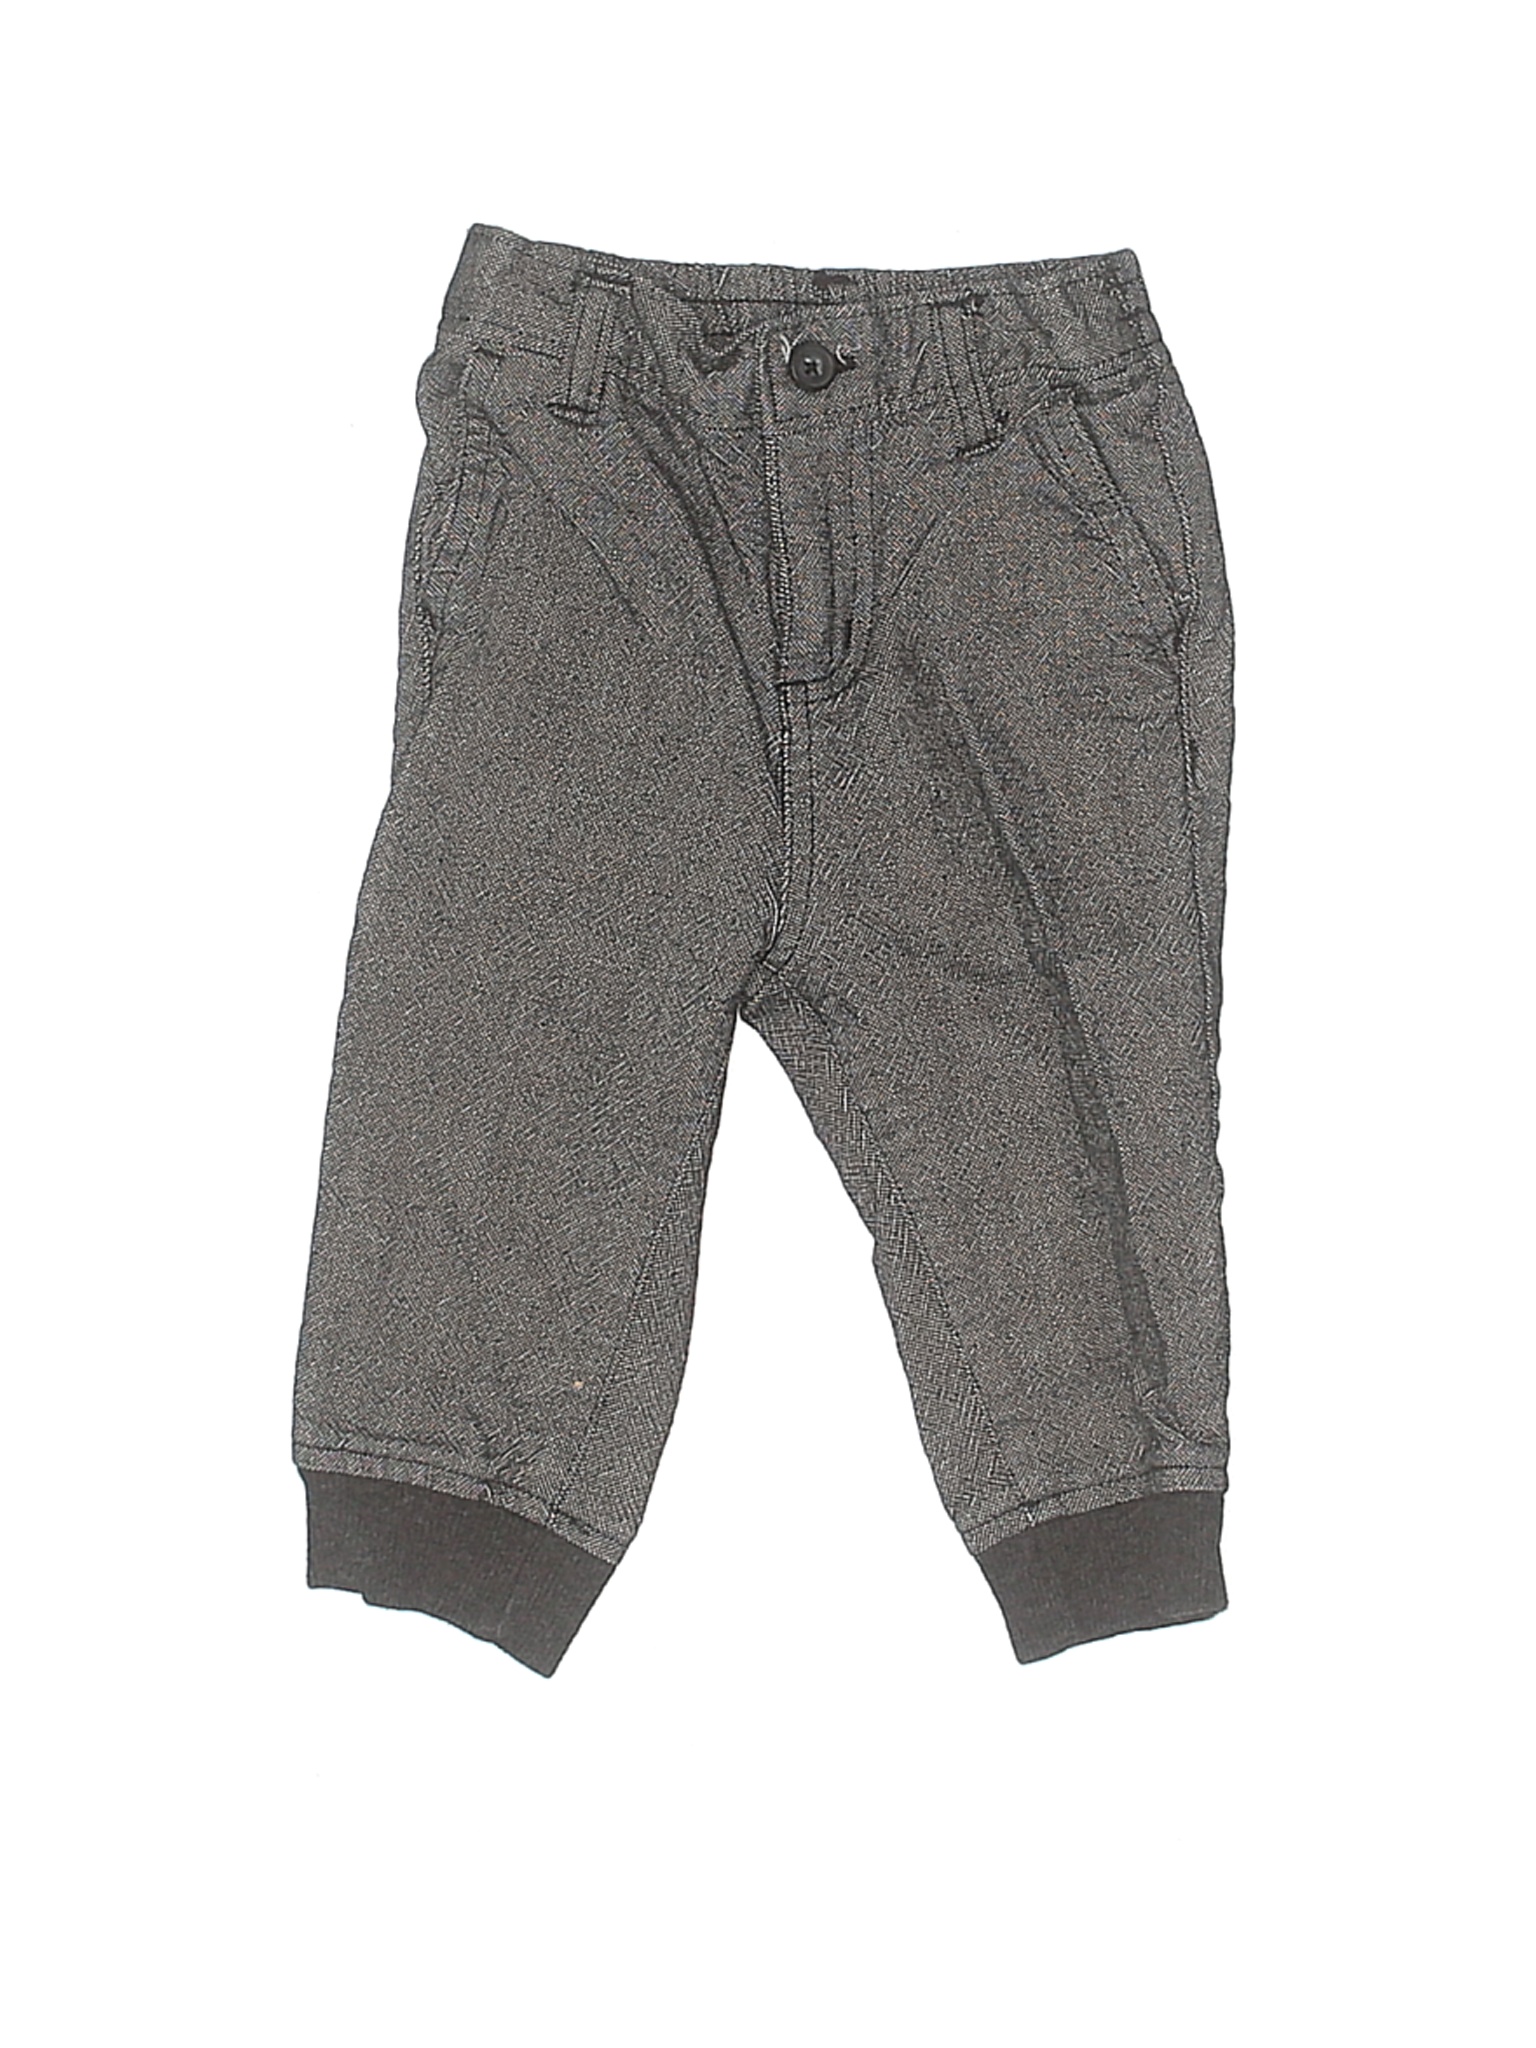 Janie and Jack Boys Gray Casual Pants 12-18 Months | eBay